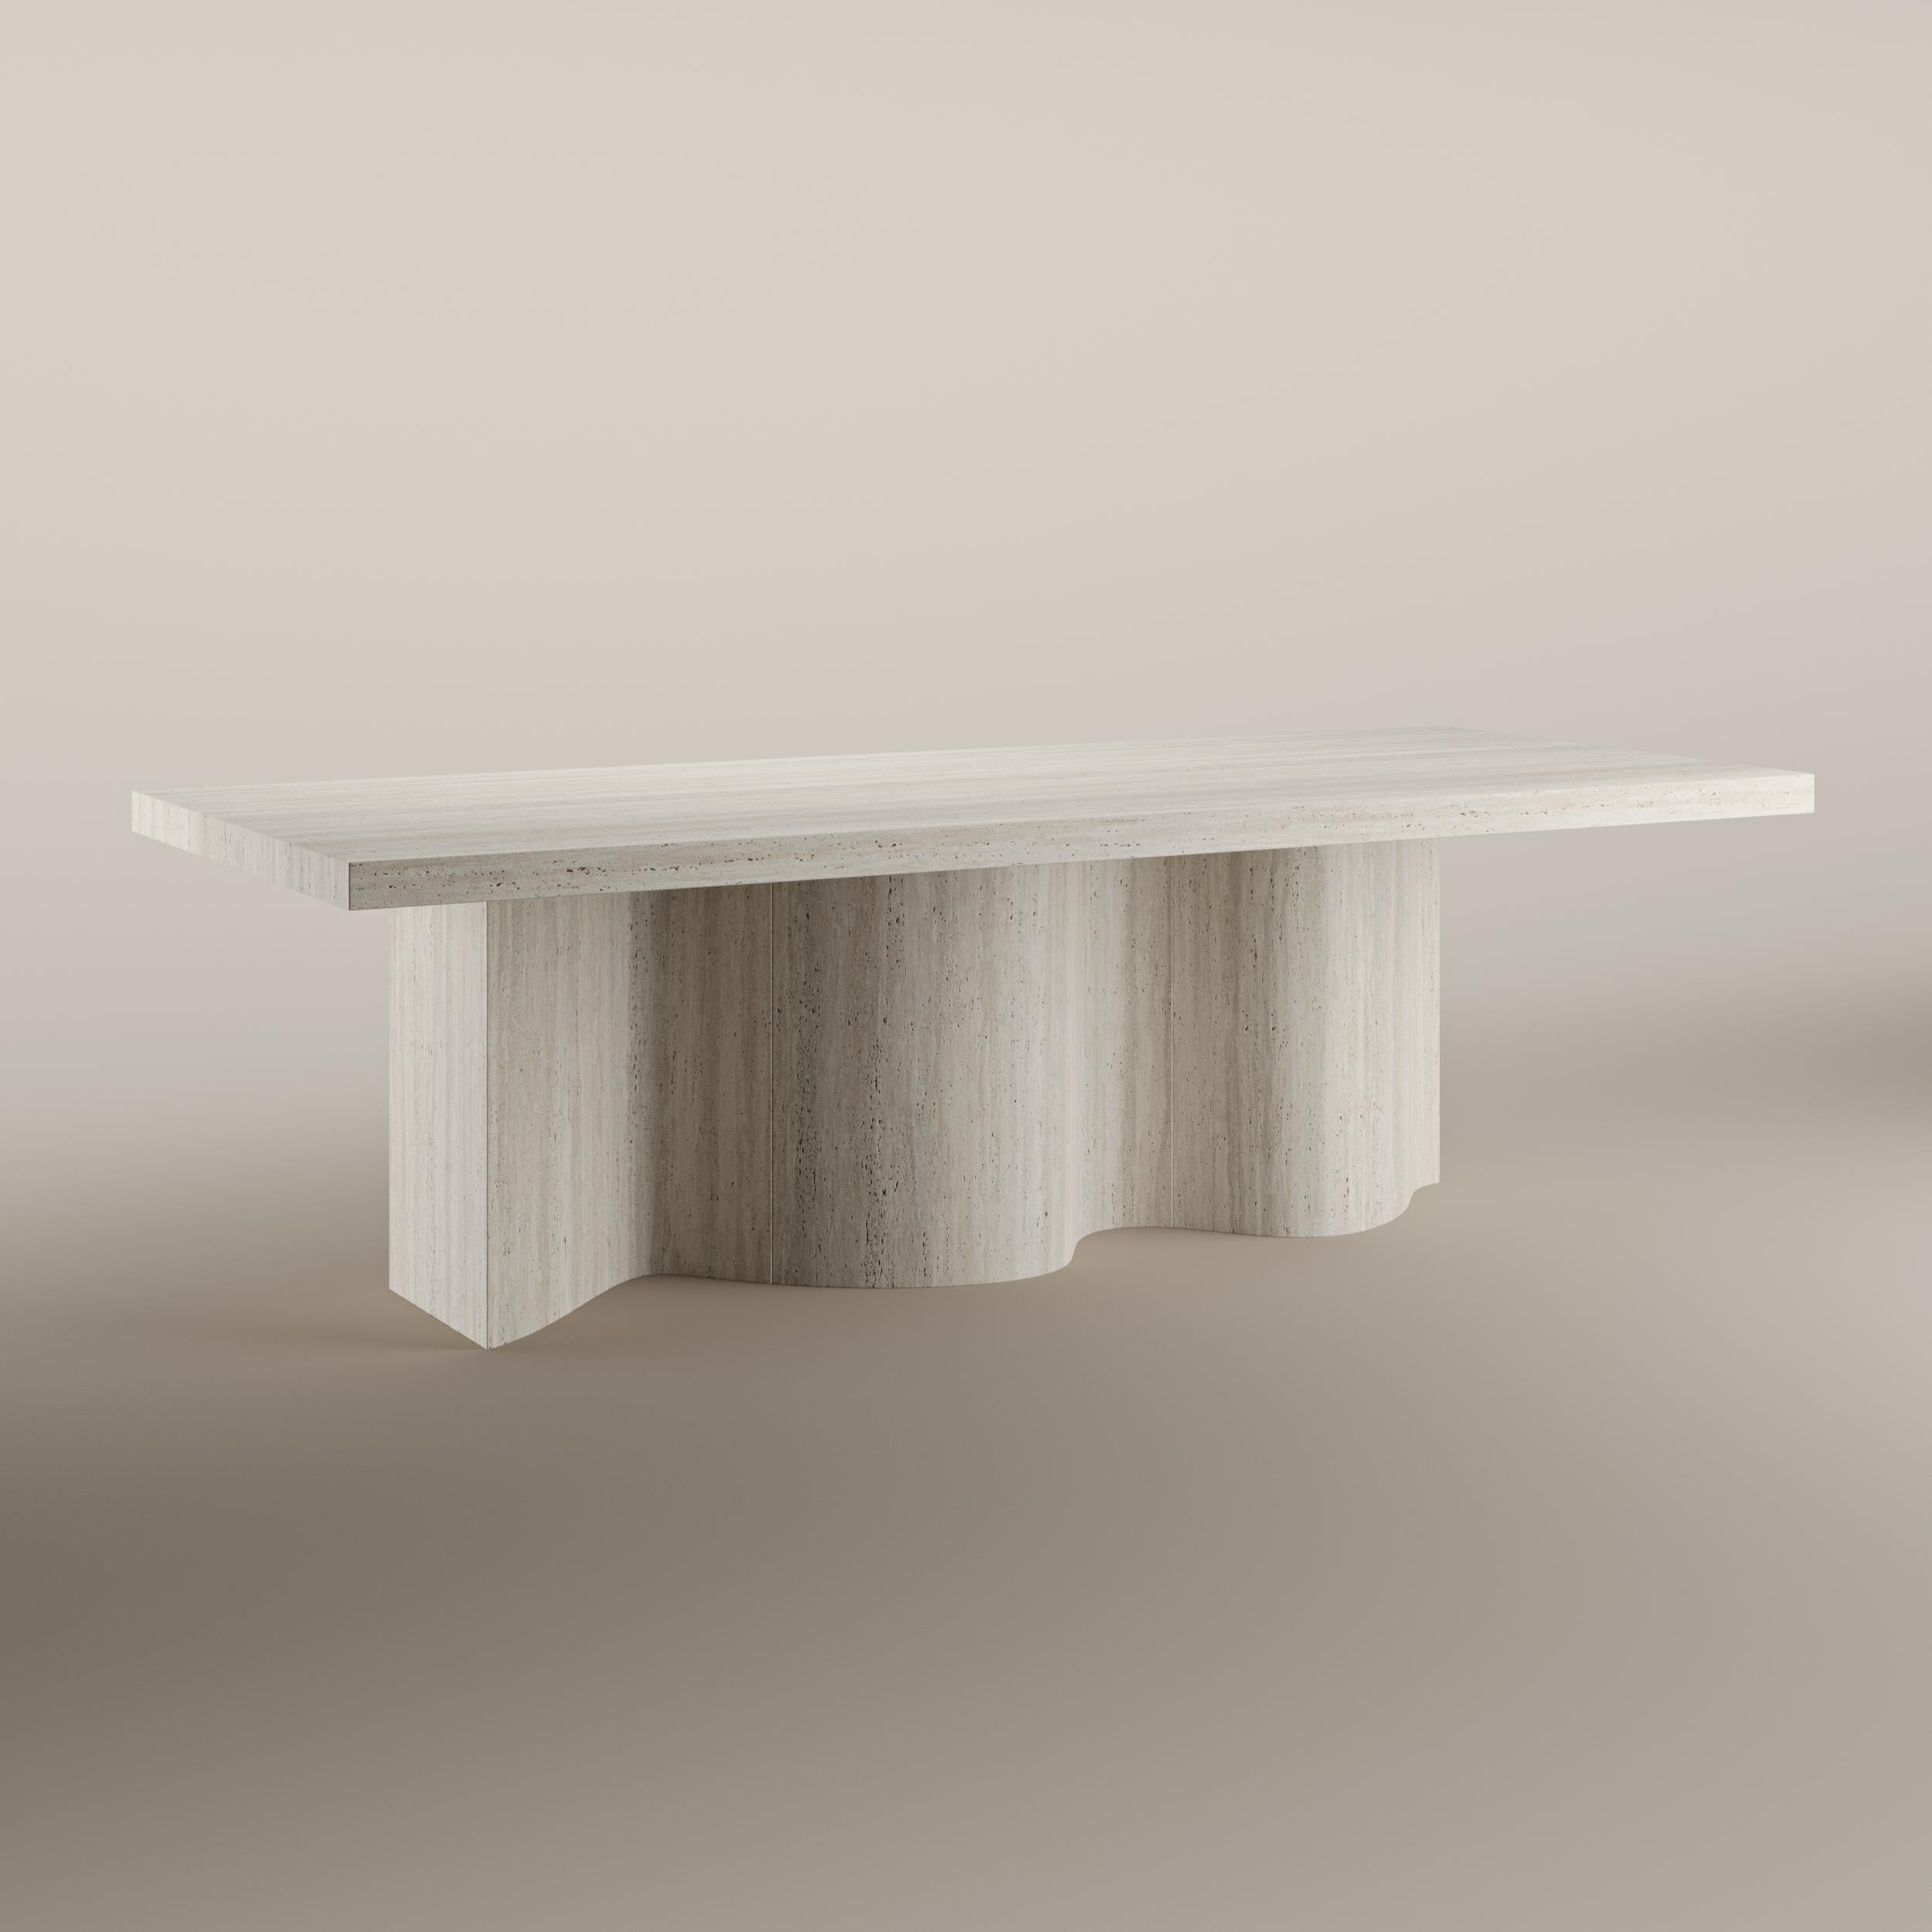 European Cadence Travertine Dining Table by T. Woon For Sale